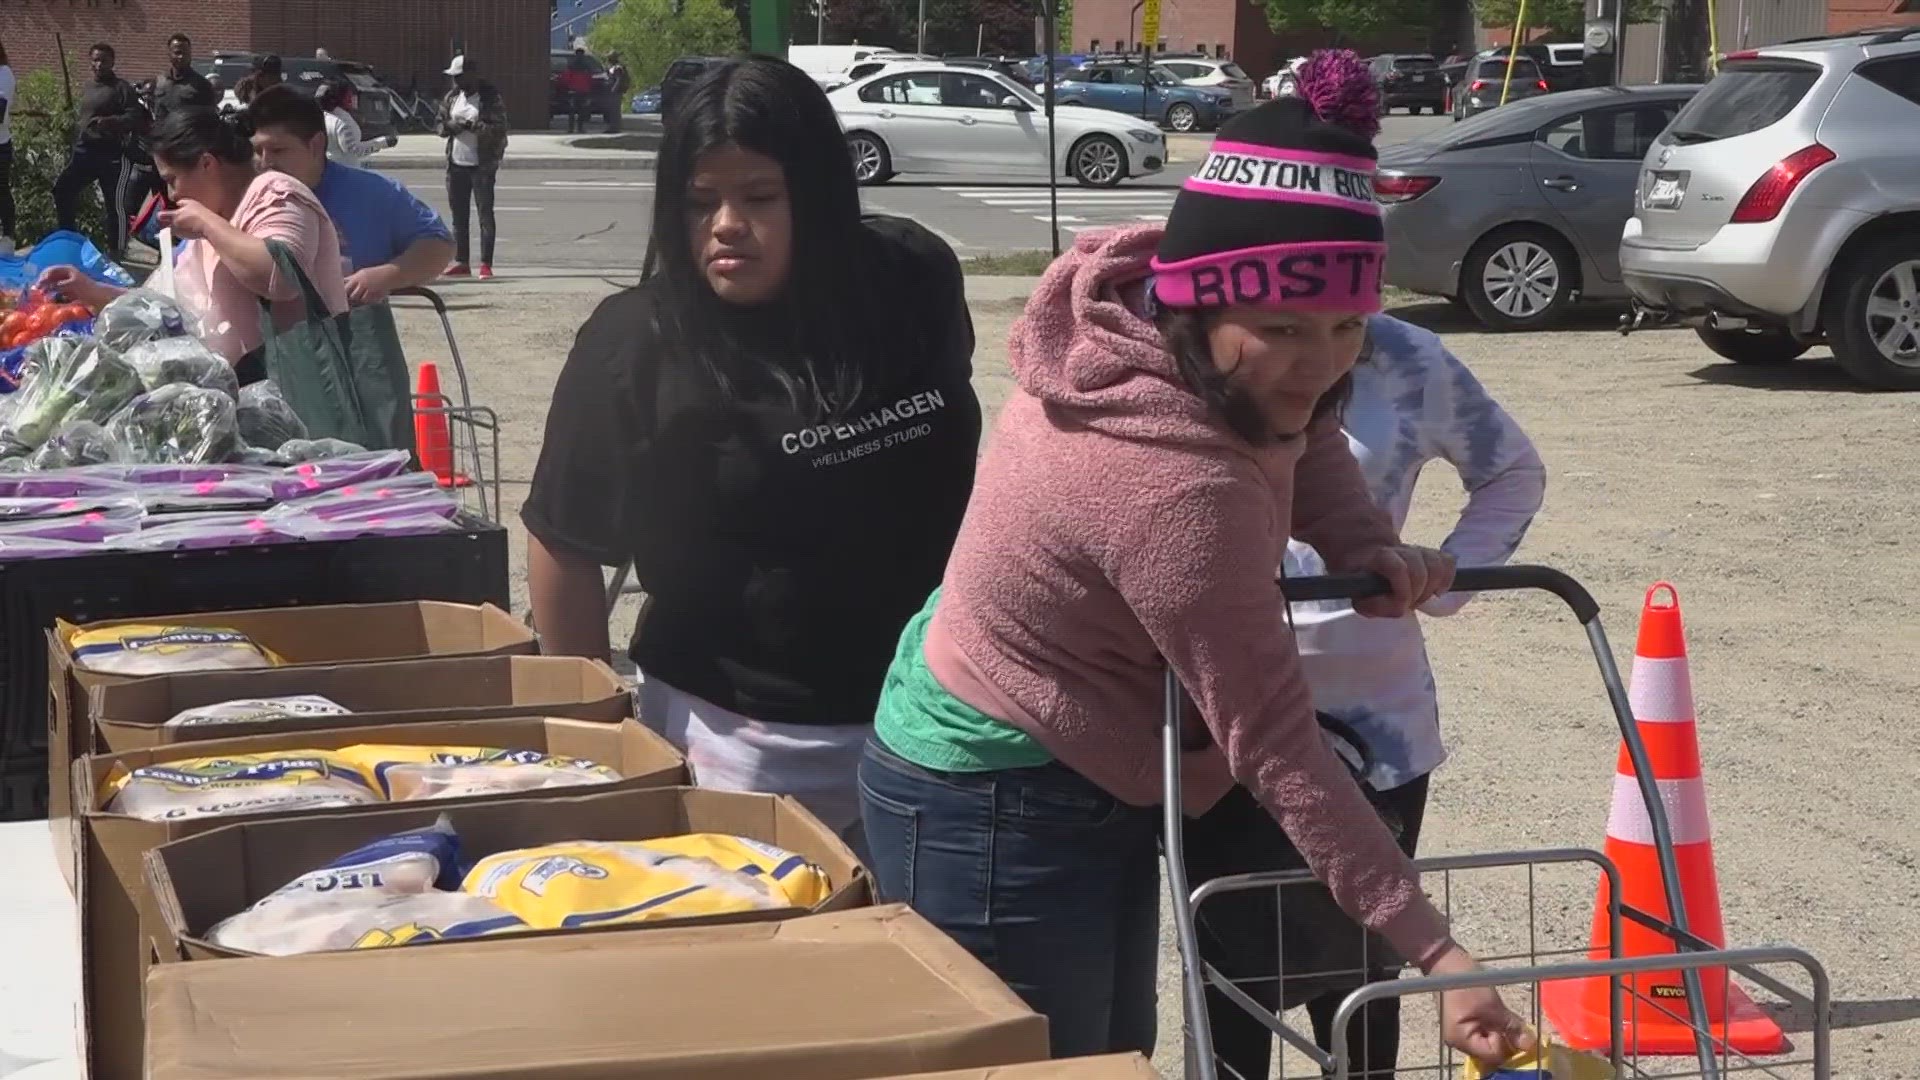 The non-profit 'Presente Maine' sets up bi-weekly solidarity food pantries for anyone in need, especially for Hispanic community members and other immigrants.